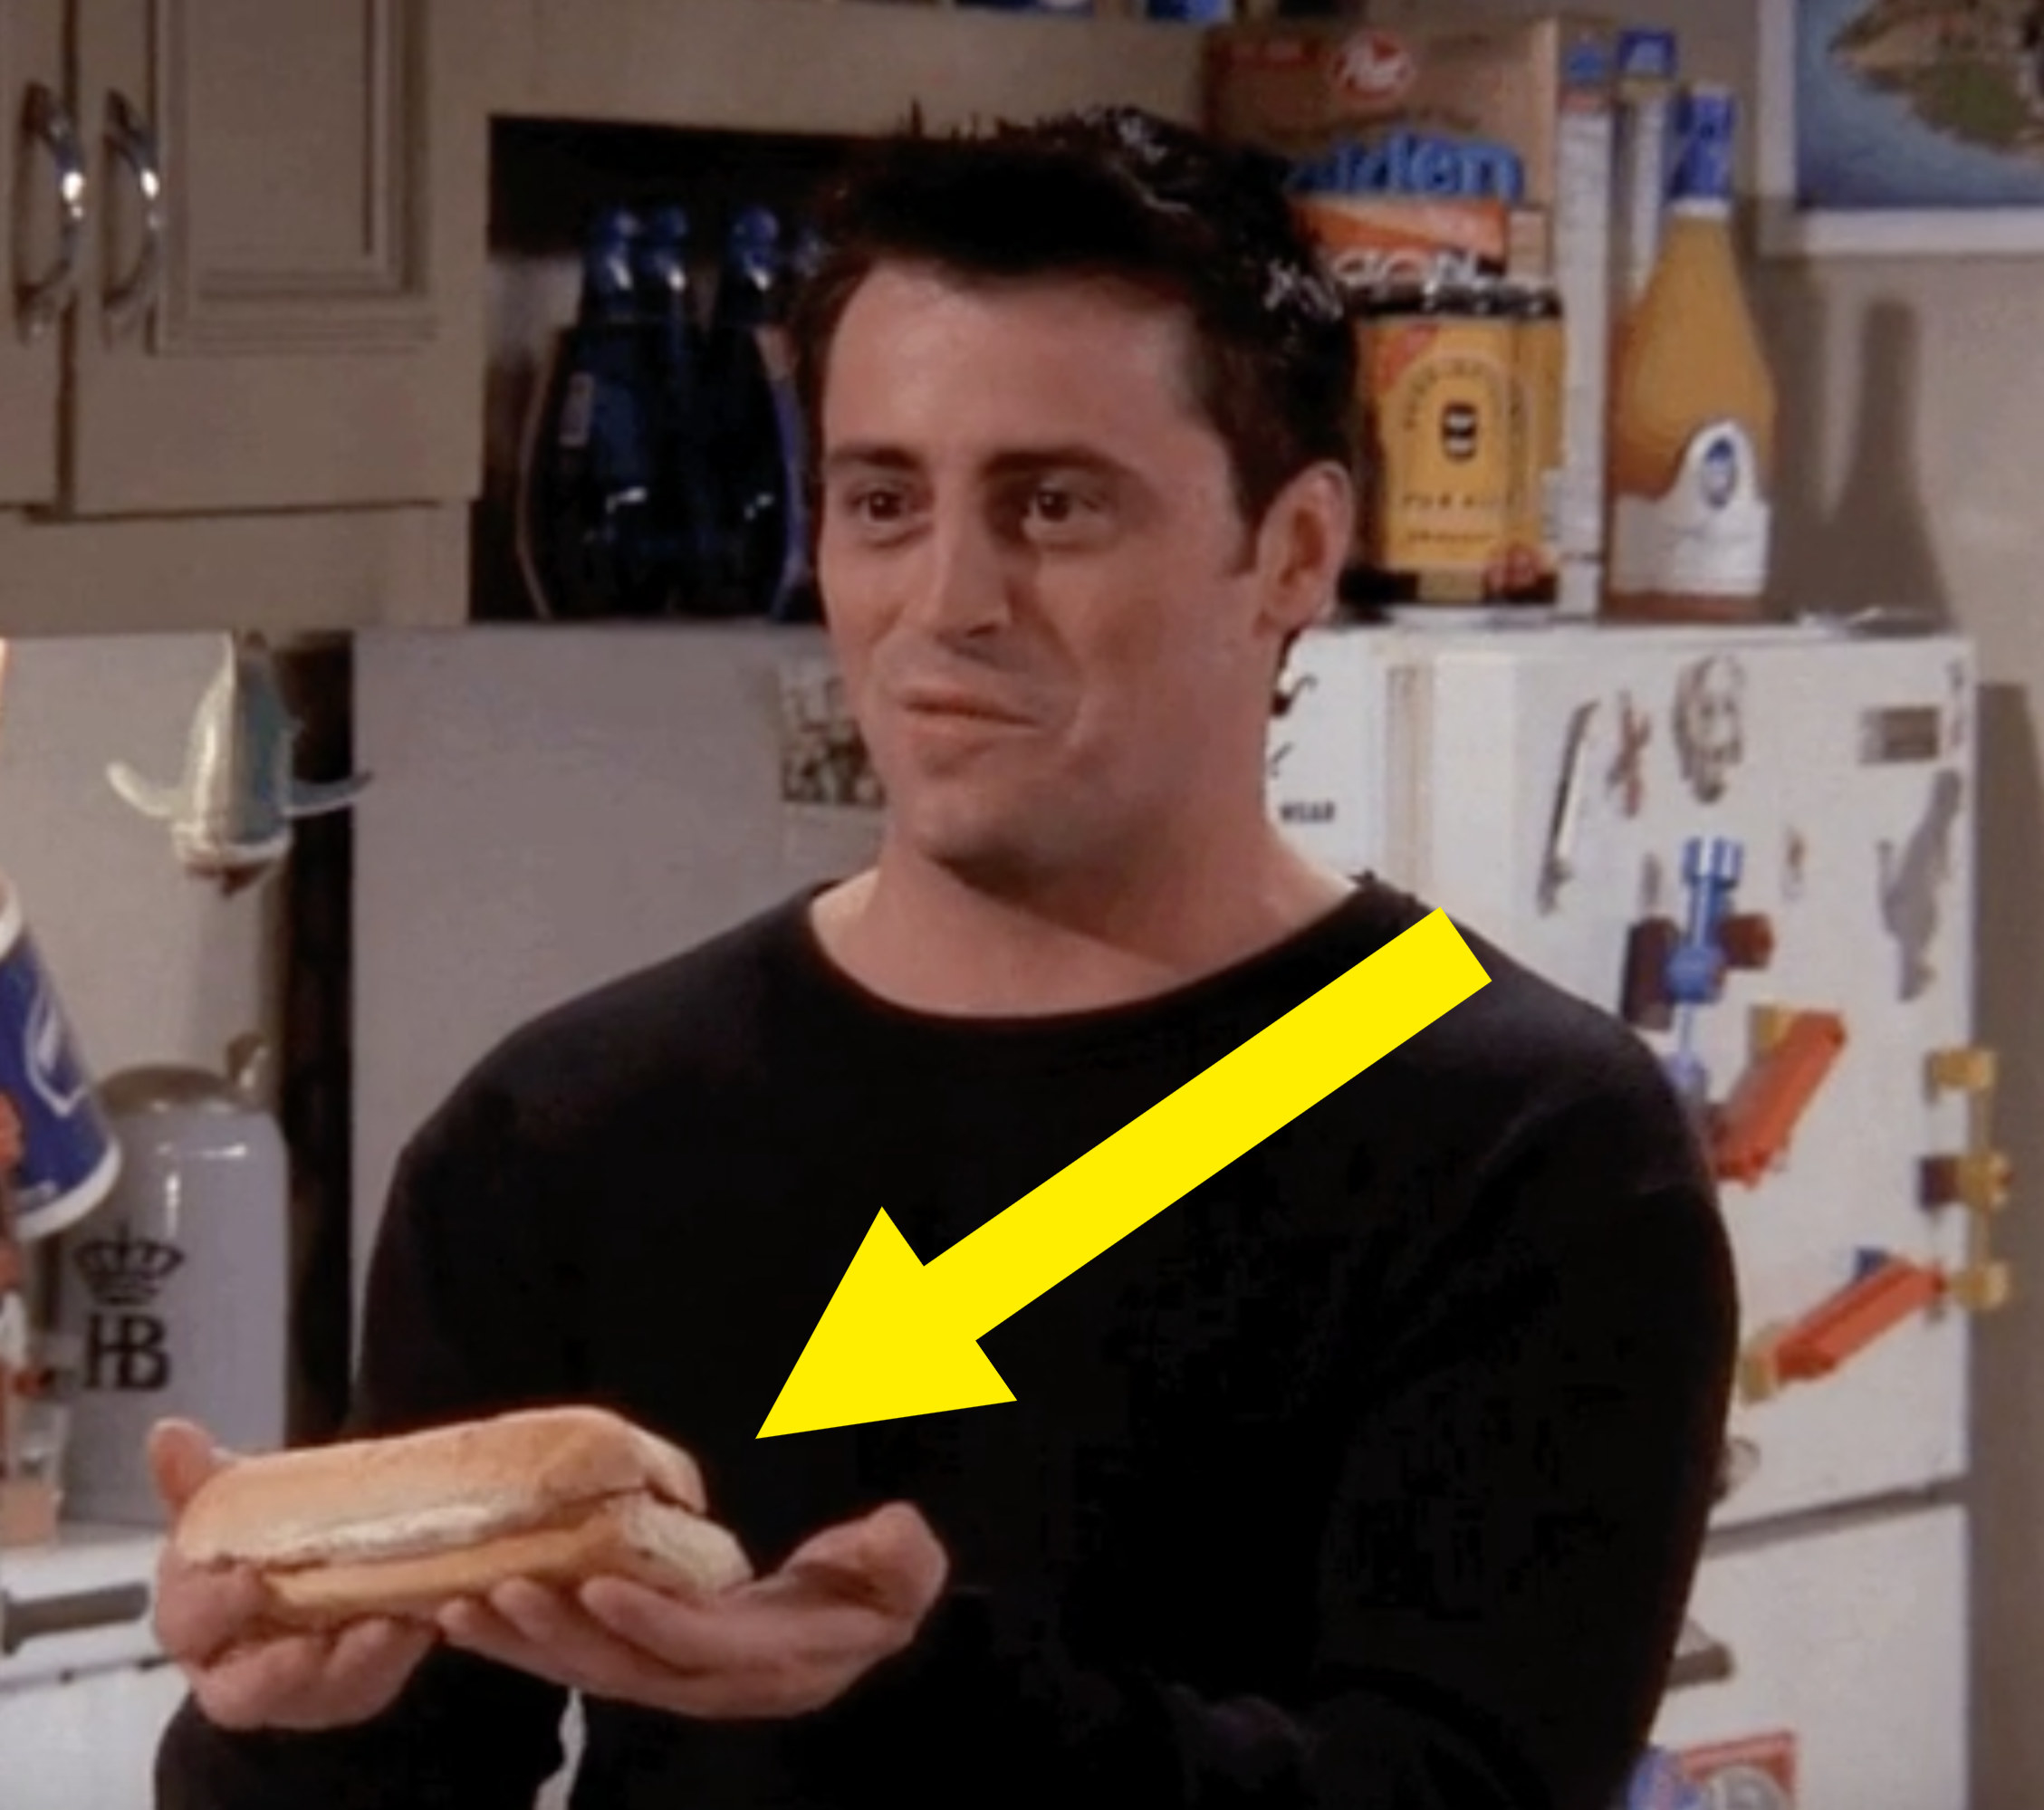 Joey from &quot;Friends&quot; holding a sandwich